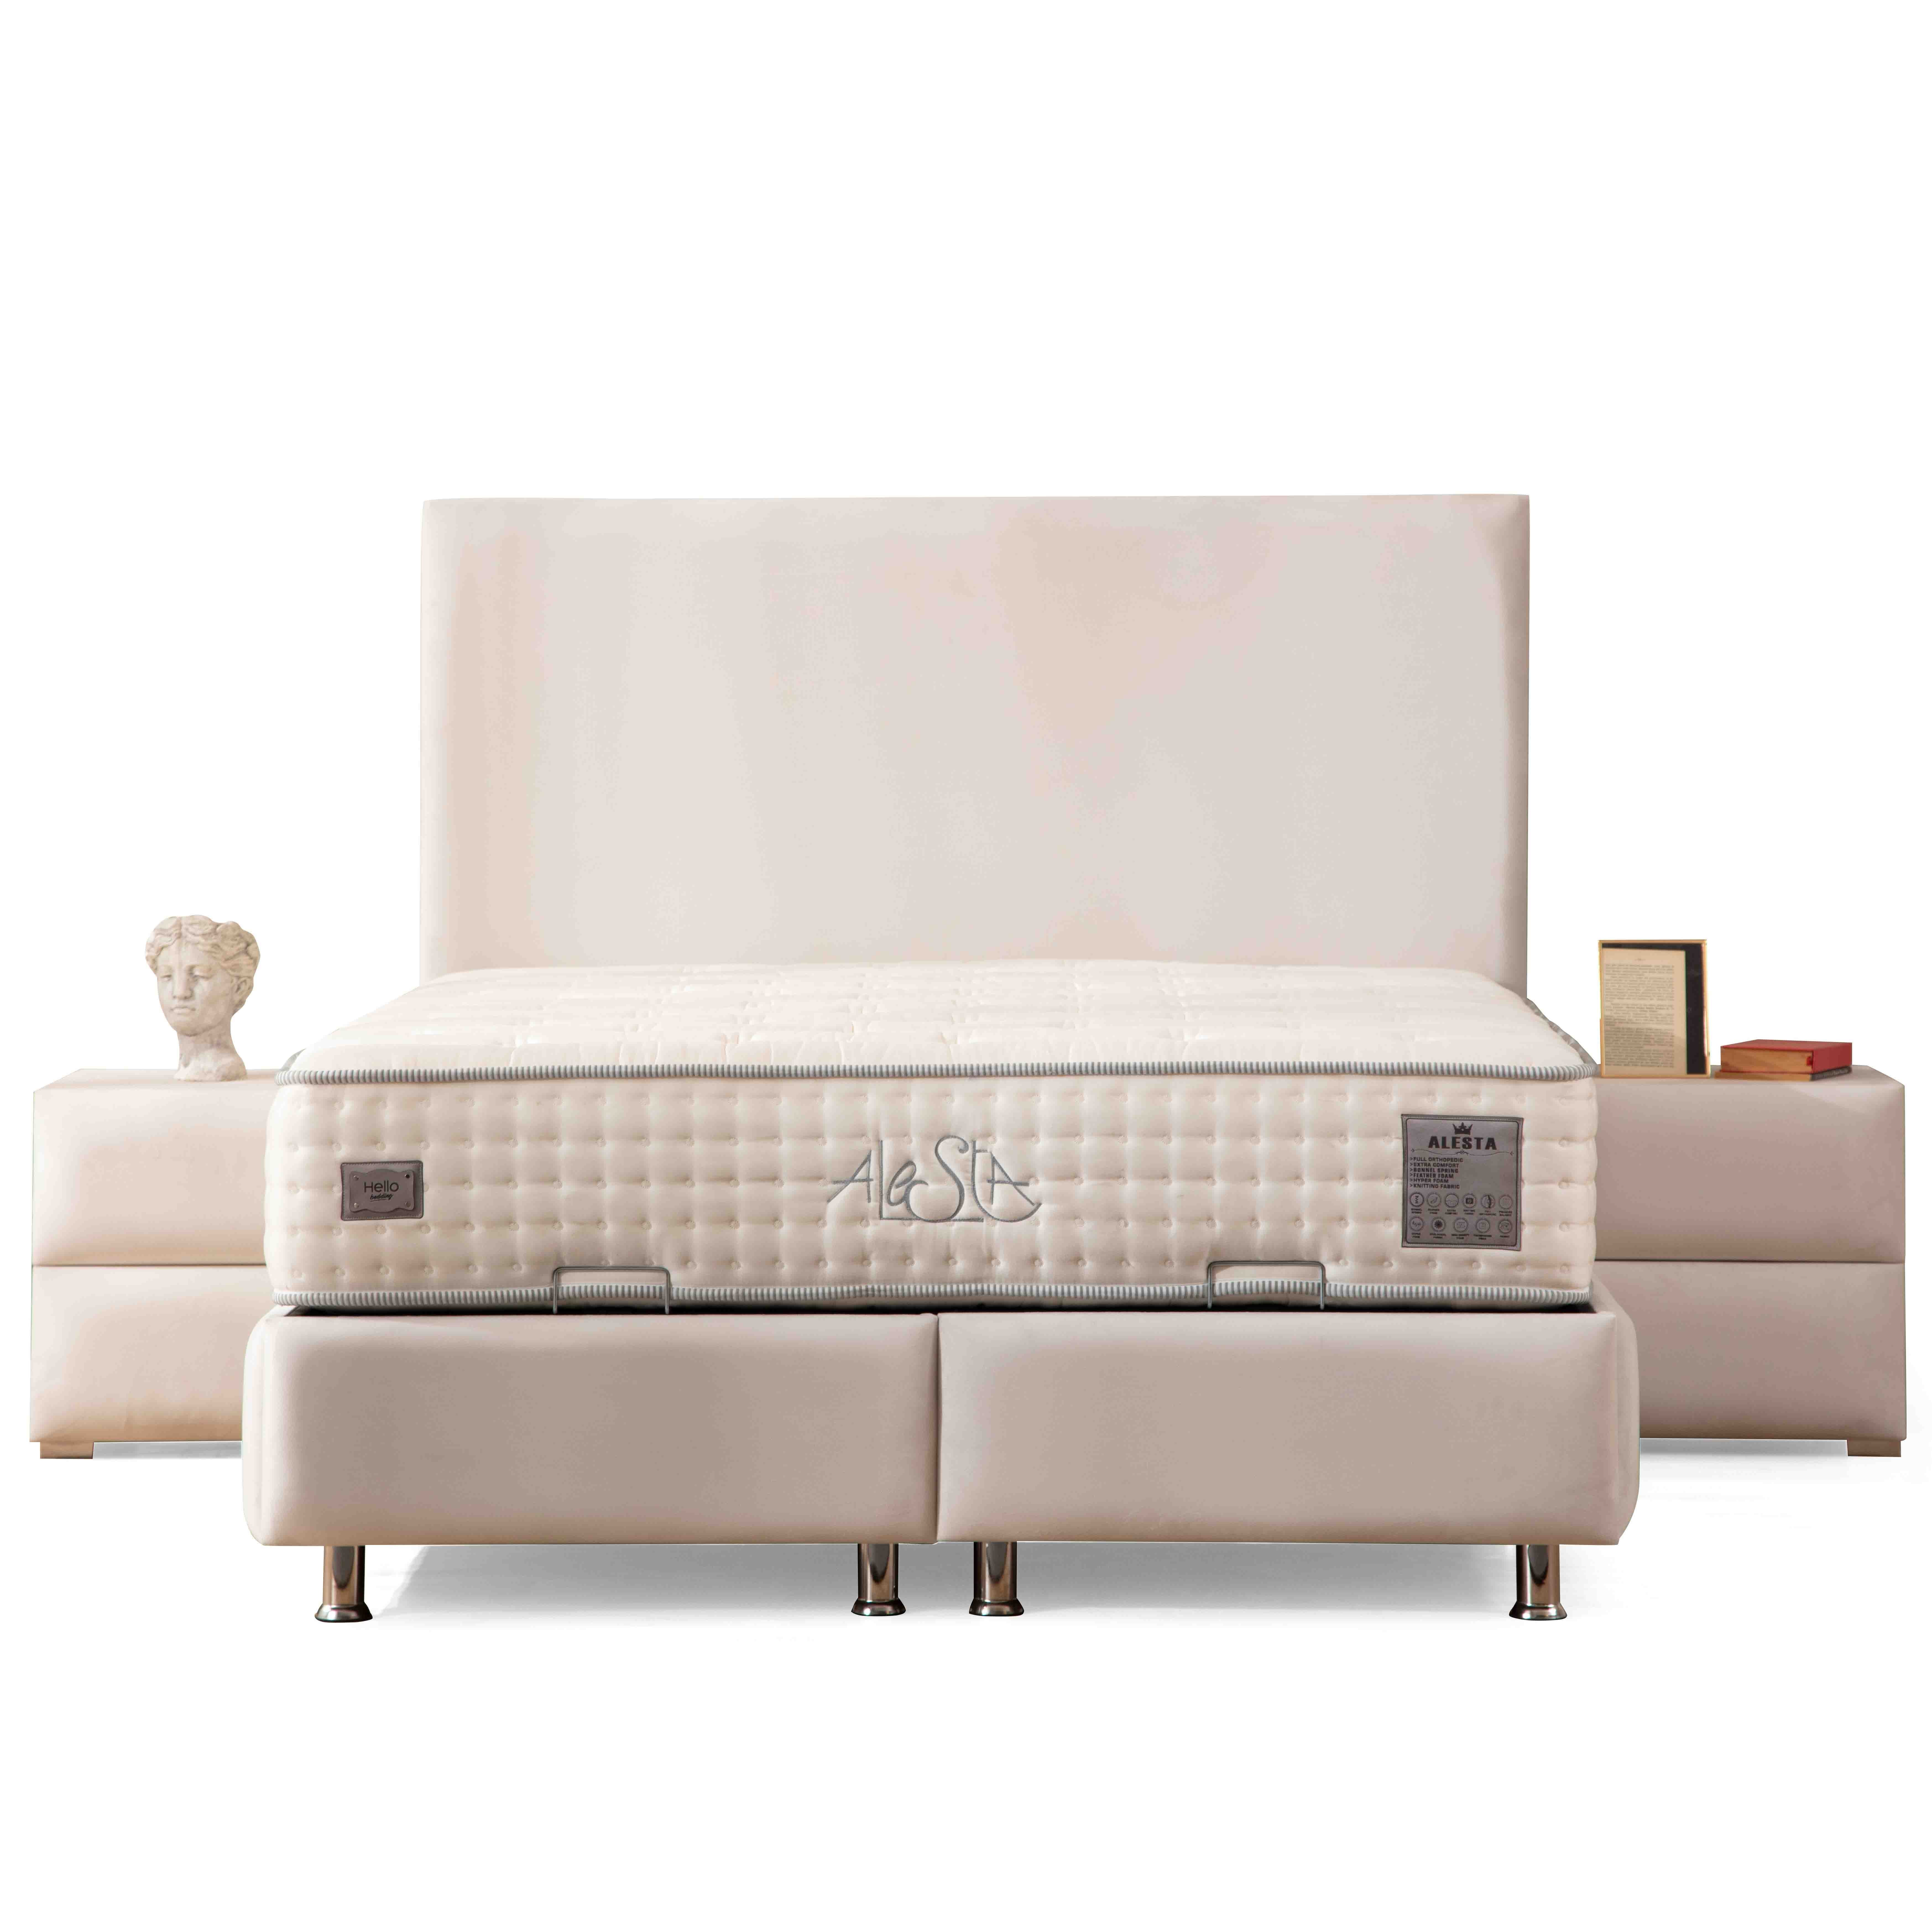 Coco Bed With Storage 120*200